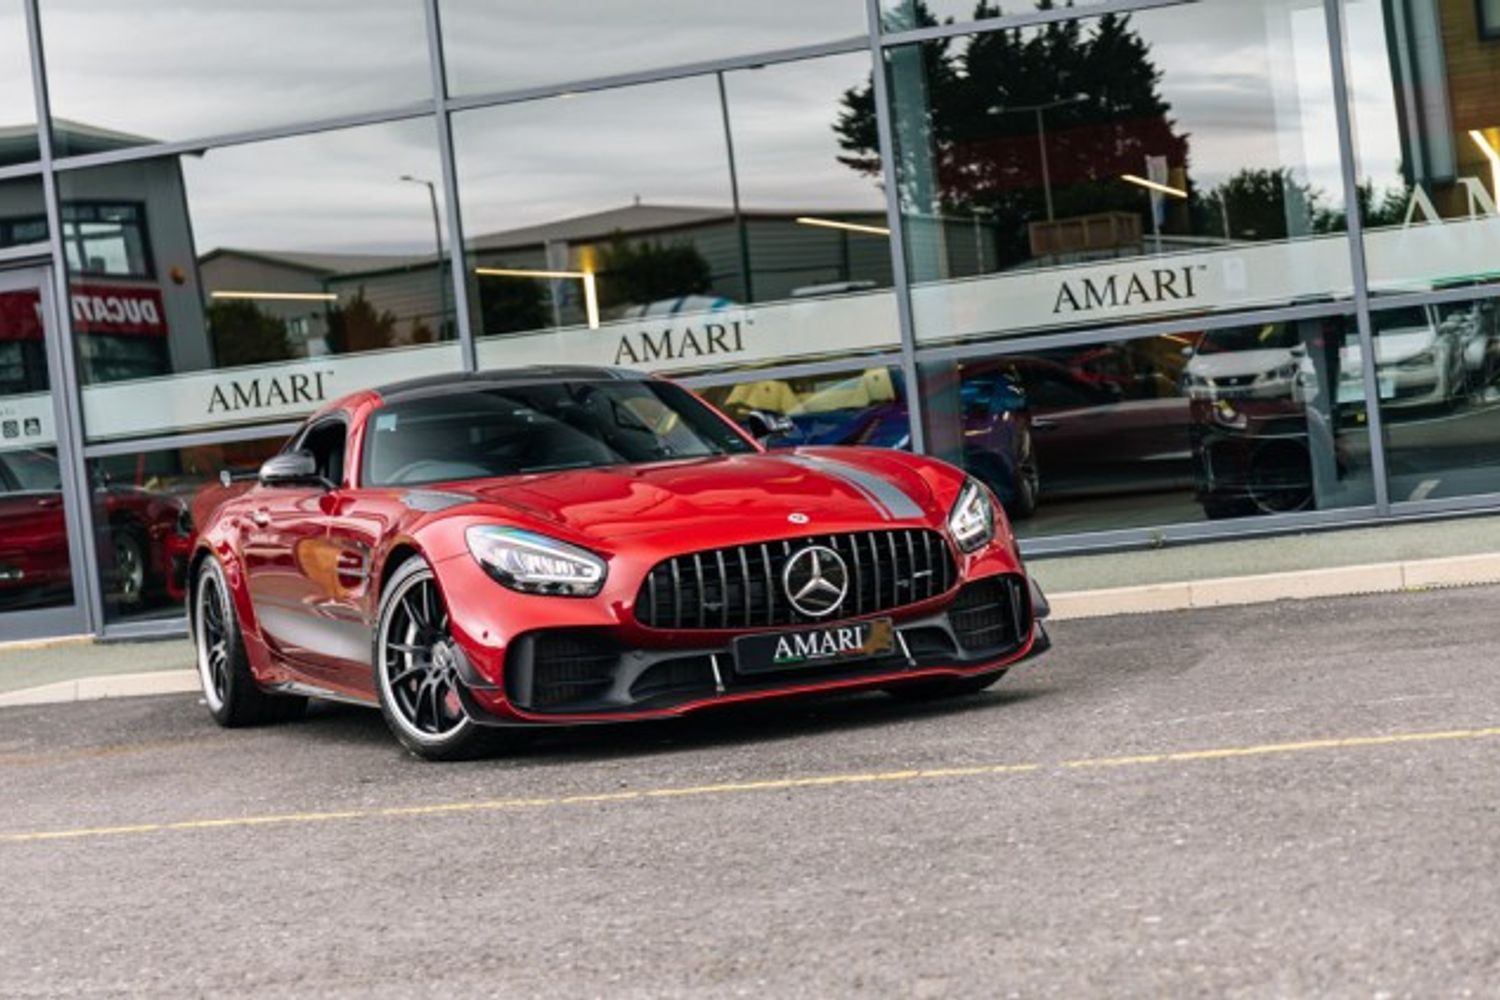 MERCEDES-BENZ GT COUPE 4.0 AMG GT R PRO 3DR SEMI AUTOMATIC